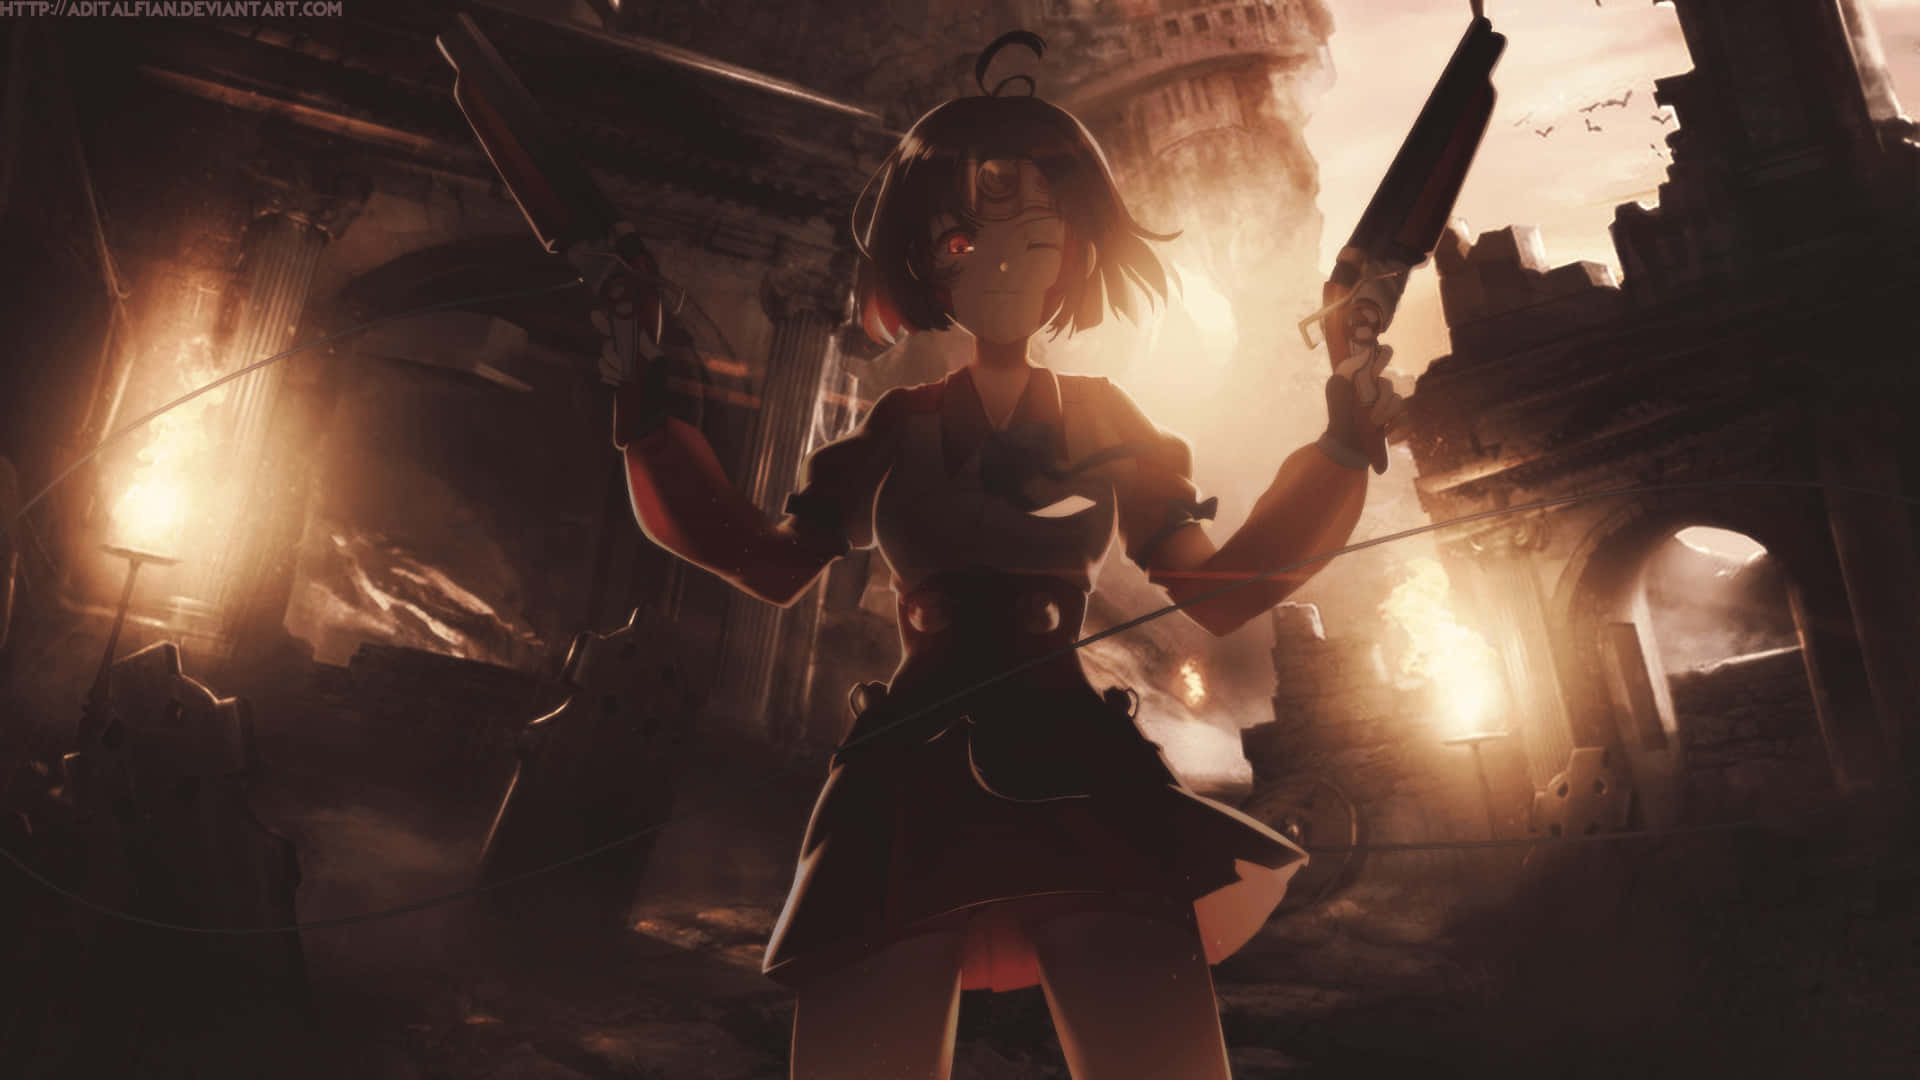 Kabaneri of the Iron Fortress Brings an Epic Tale of Surviving Adversity Wallpaper